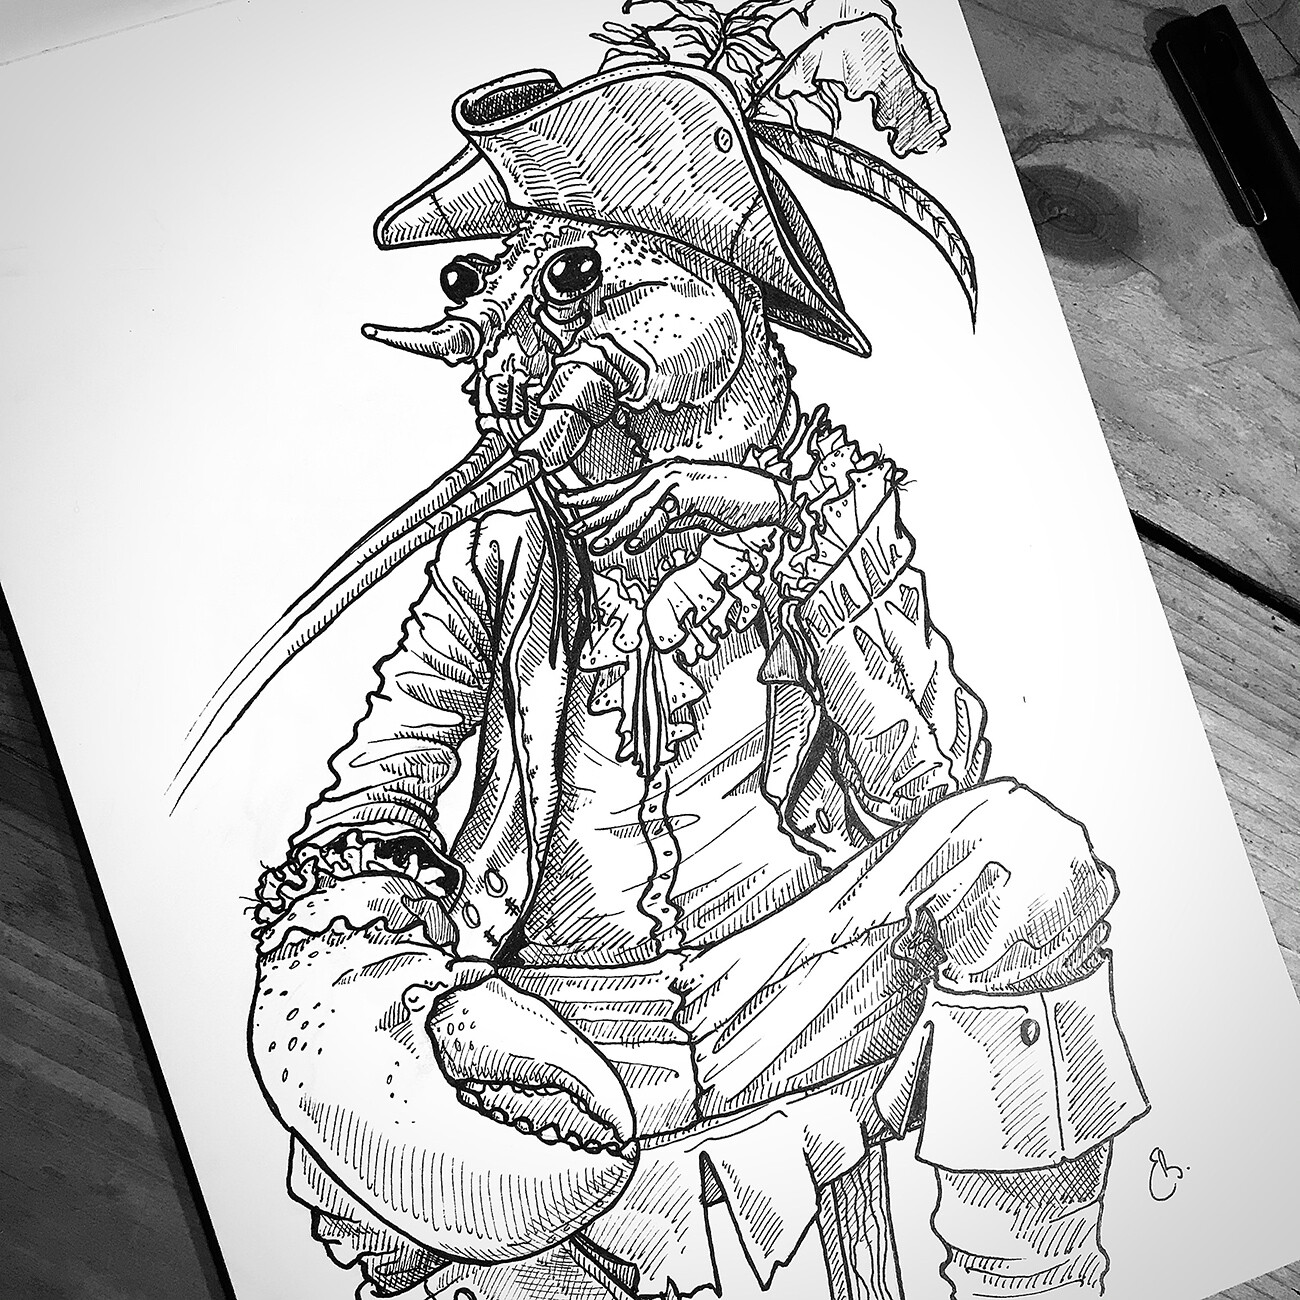 Lobster - Pirate study 01